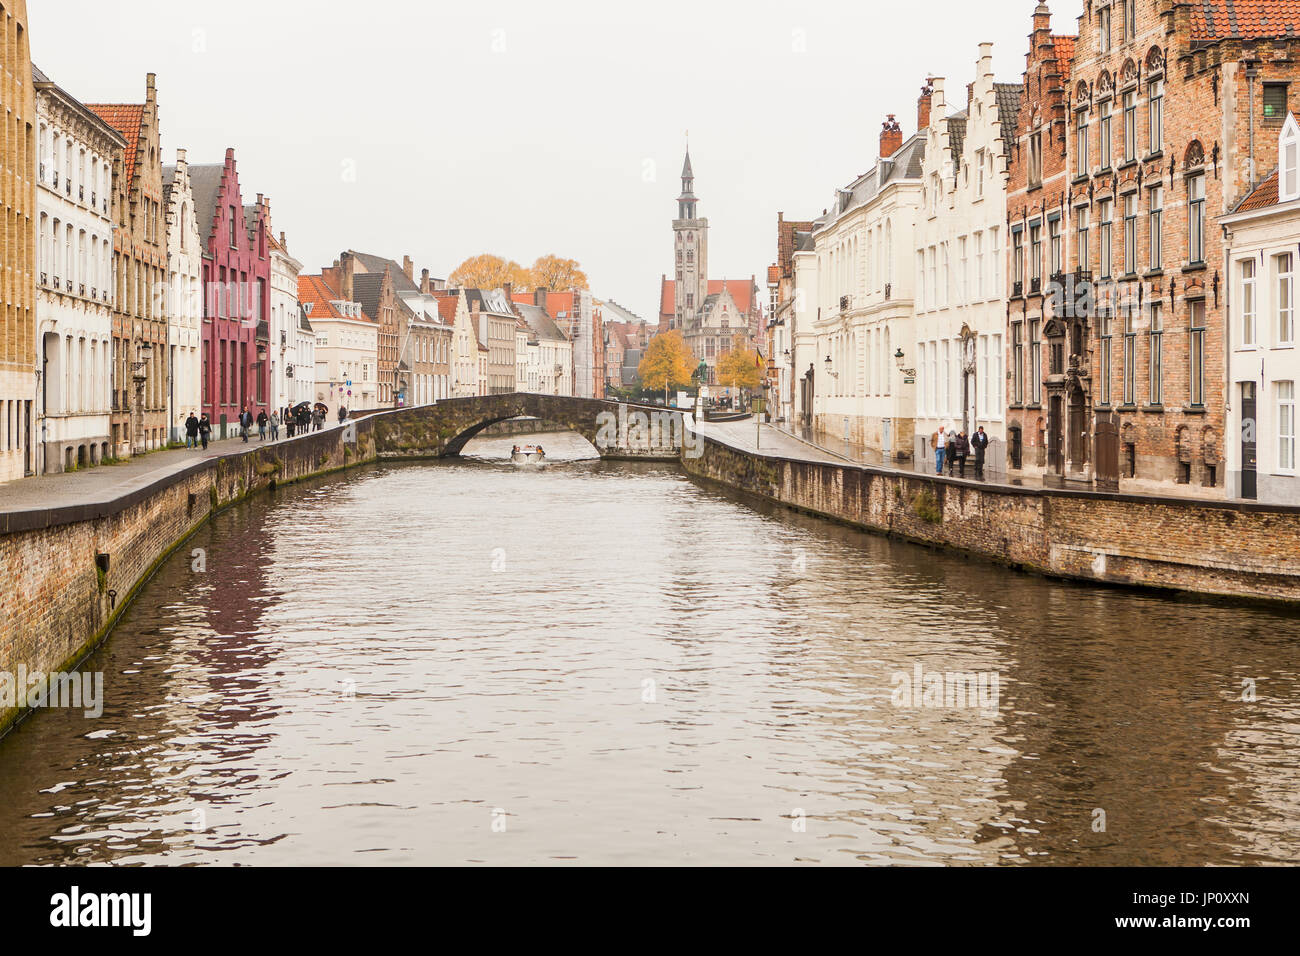 Bruges, Belgium – October 31, 2010: Boat going under the Koningstraat bridge and people walking by the canal in the rain on Spinolarei and Spiegelrei in Bruges, the statue of Van Eyck and the Poortersloge beyond. Bruges is sometimes referred to as the Venice of the North. Stock Photo